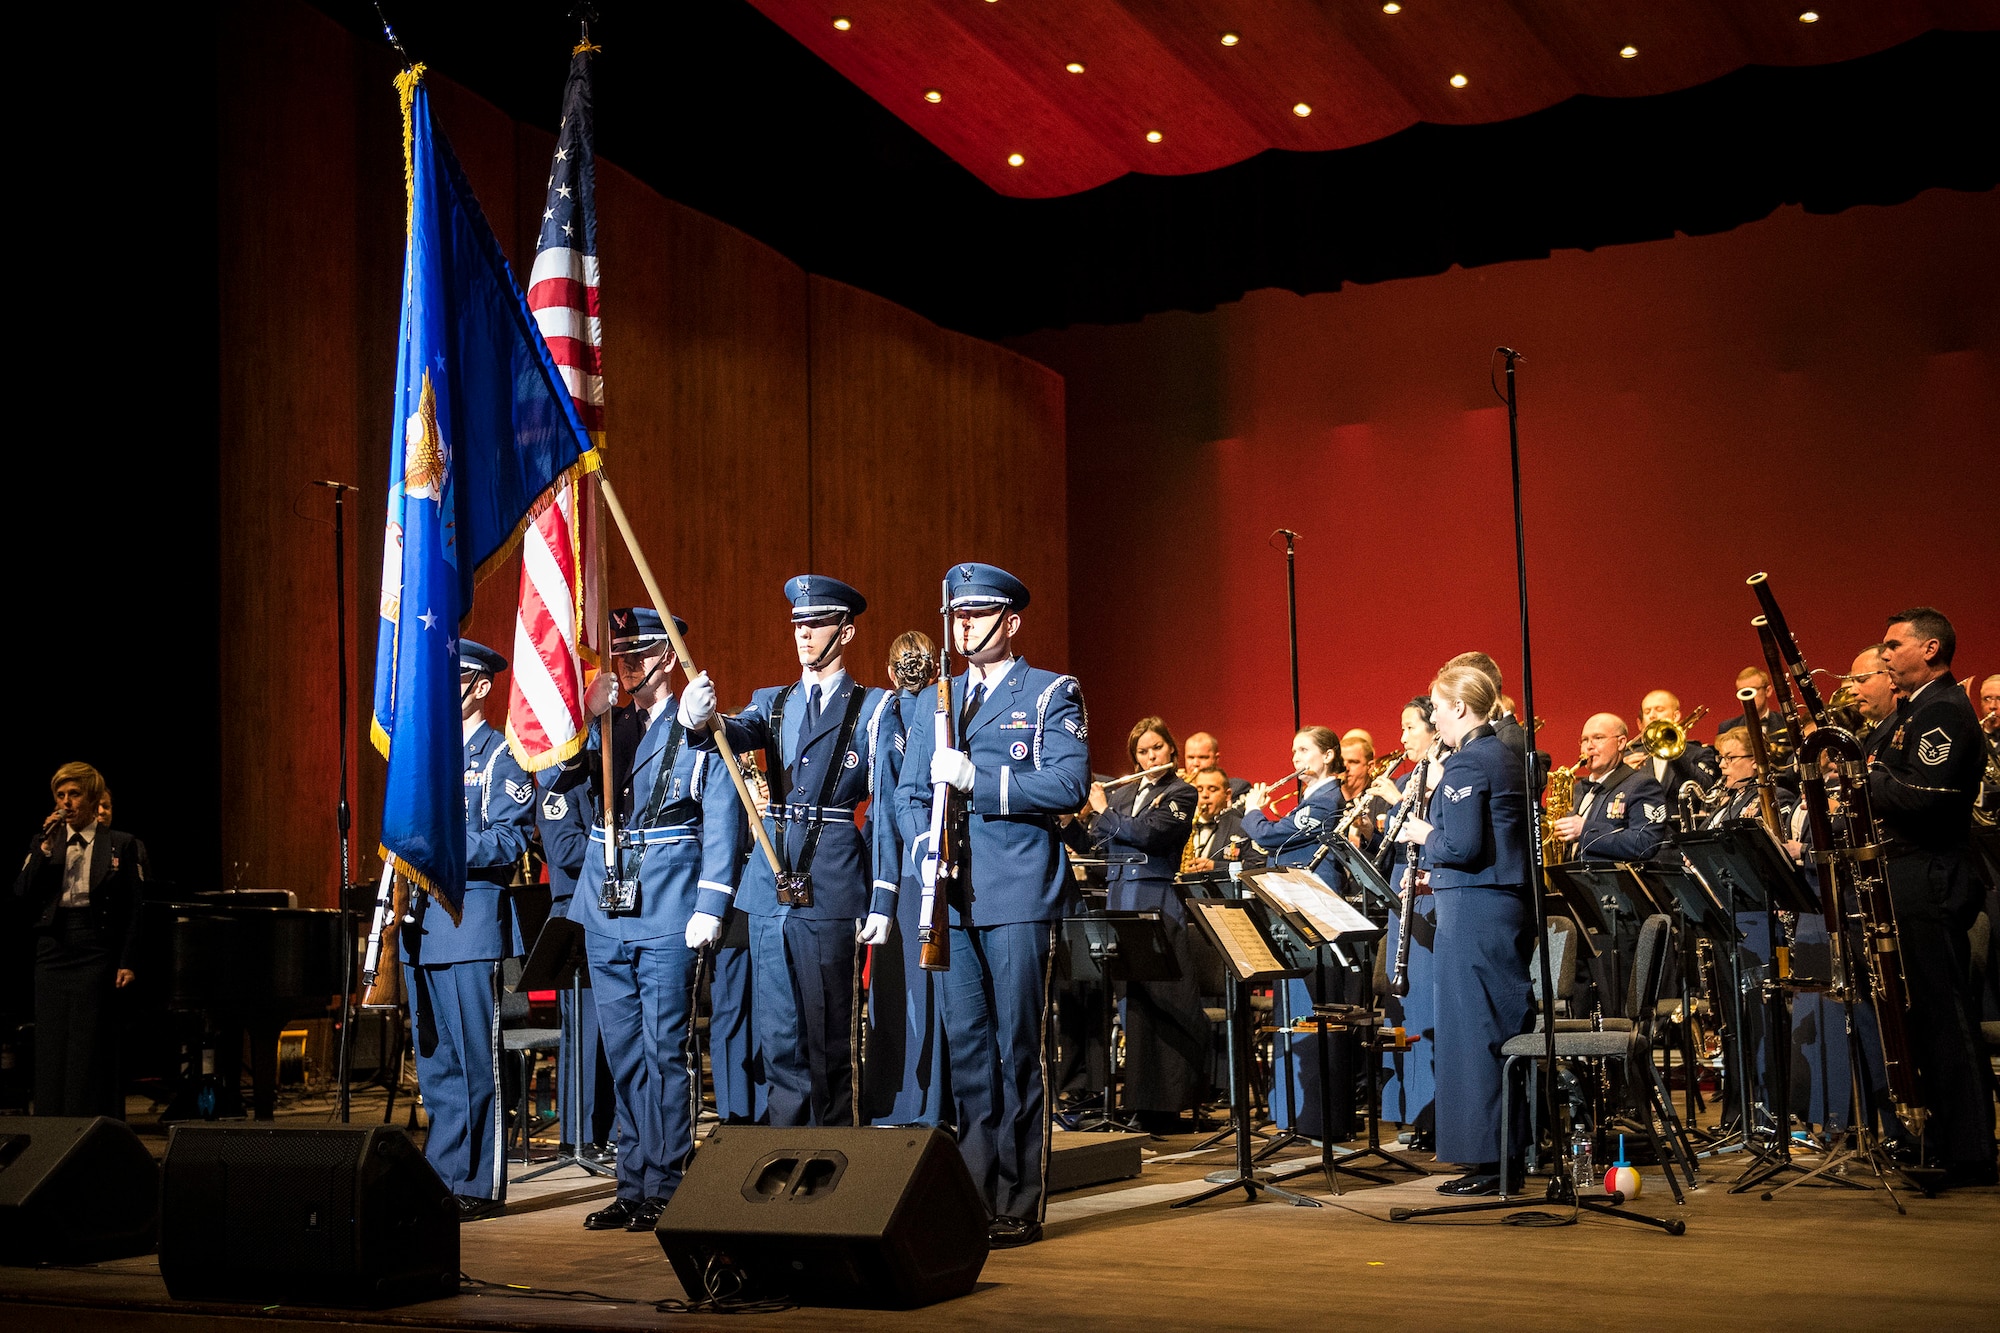 The Hill Air Force Base Honor Guard presents the U.S. flag during the national anthem Feb. 13 at Weber State University’s Austad Auditorium, Ogden, Utah. After the national anthem, the U.S Air Force Academy Band performed several musical pieces for the community during a free concert. (U.S. Air Force photo)